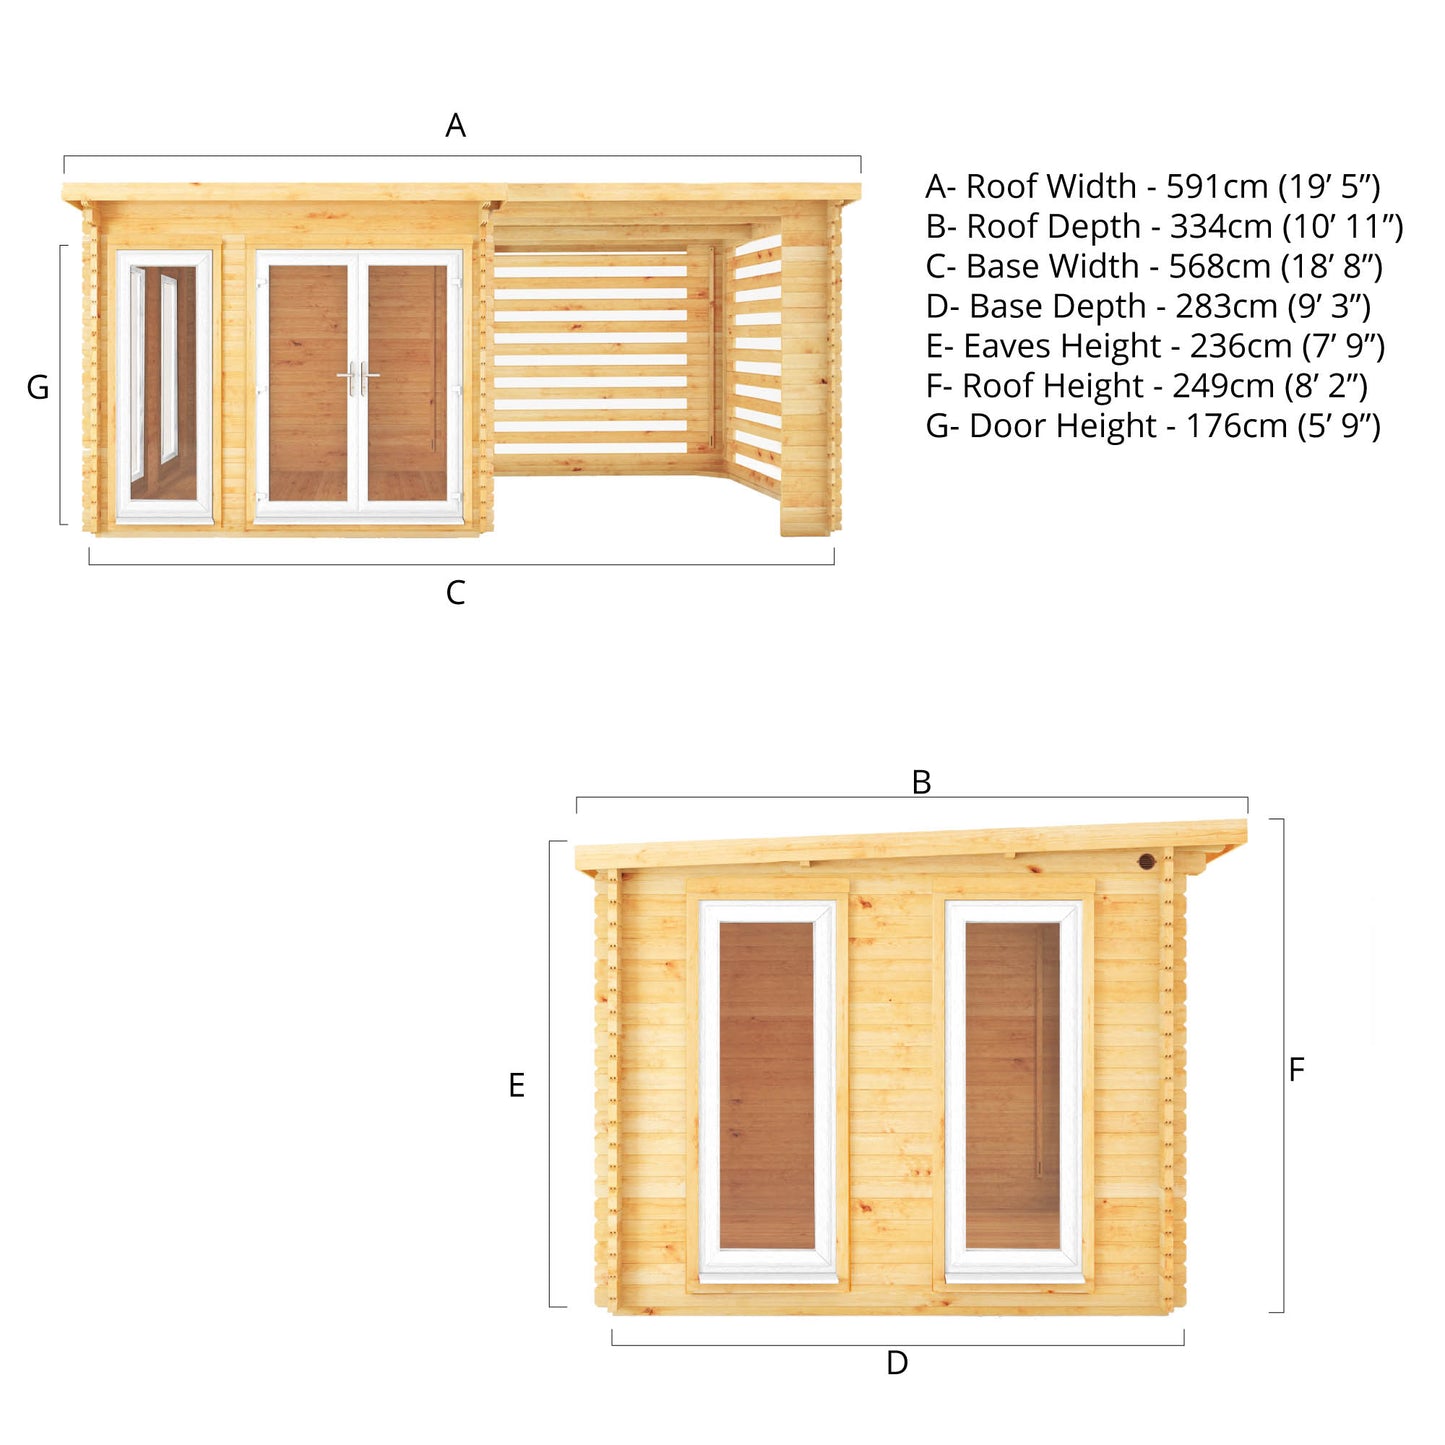 The 6m x 3m Wren Log Cabin with Slatted Area and White UPVC